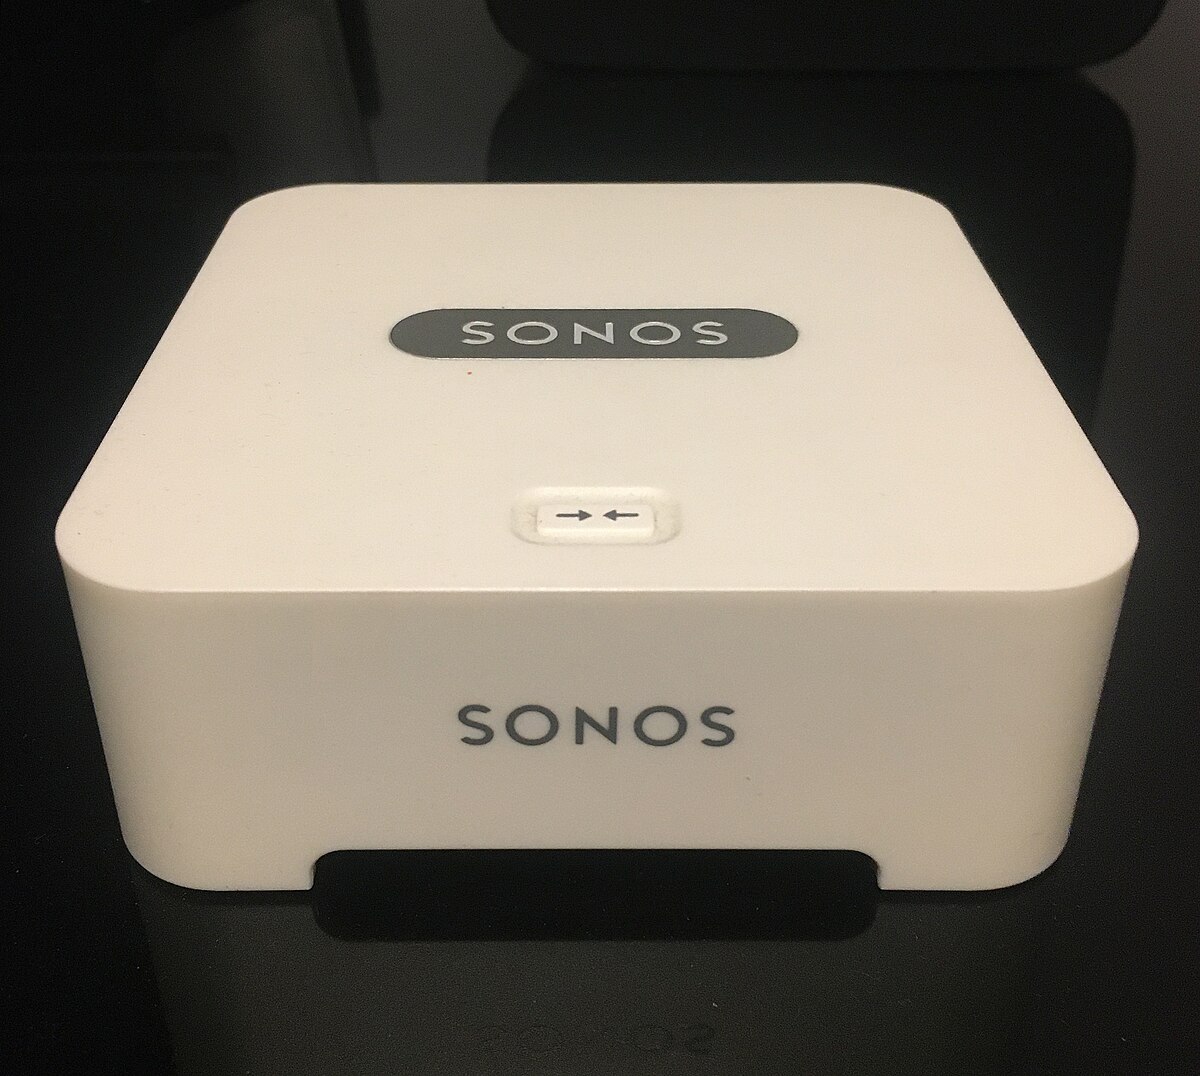 File:Sonos Bridge (discontinued product) n.2.jpg Wikimedia Commons